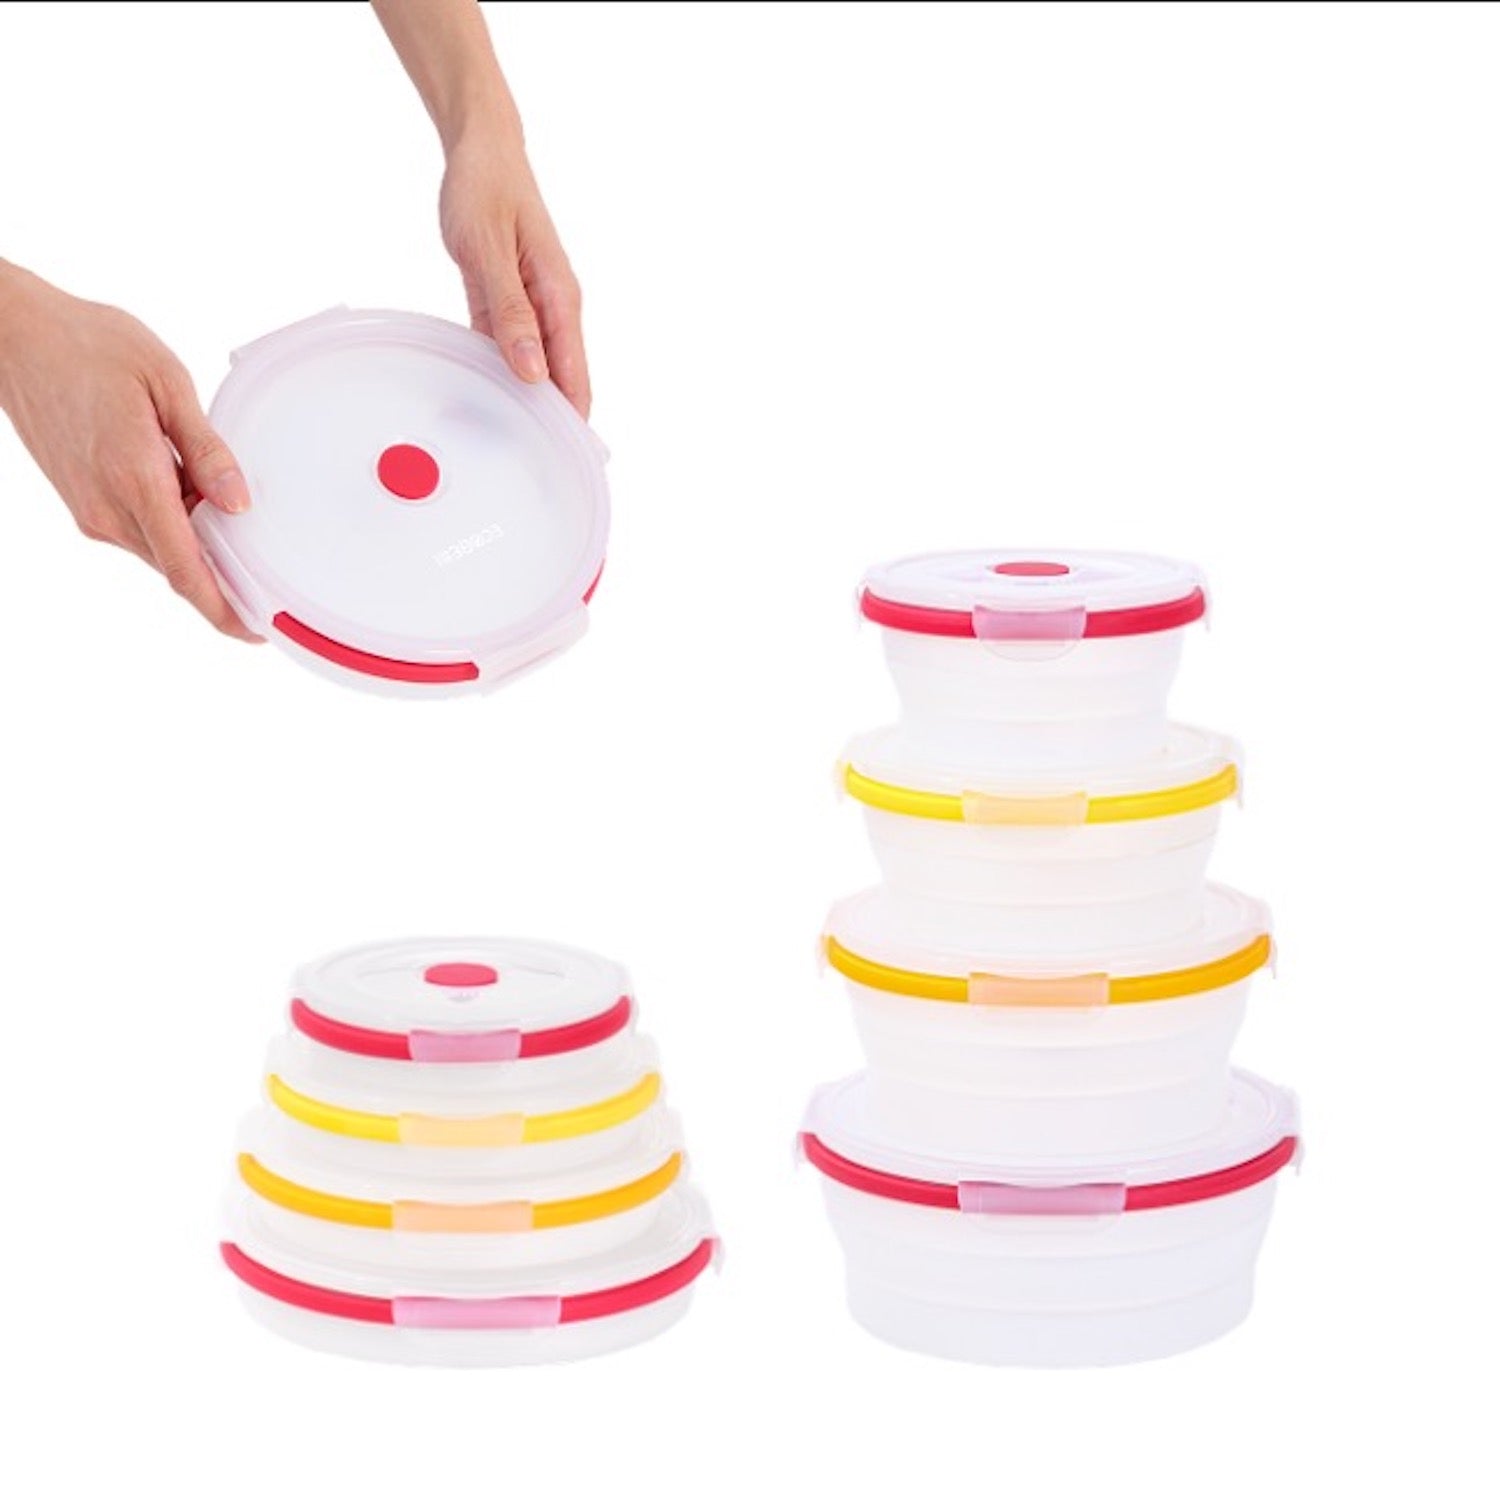 Collapsible Food Storage Containers Round Set of 4 Multi-Colored